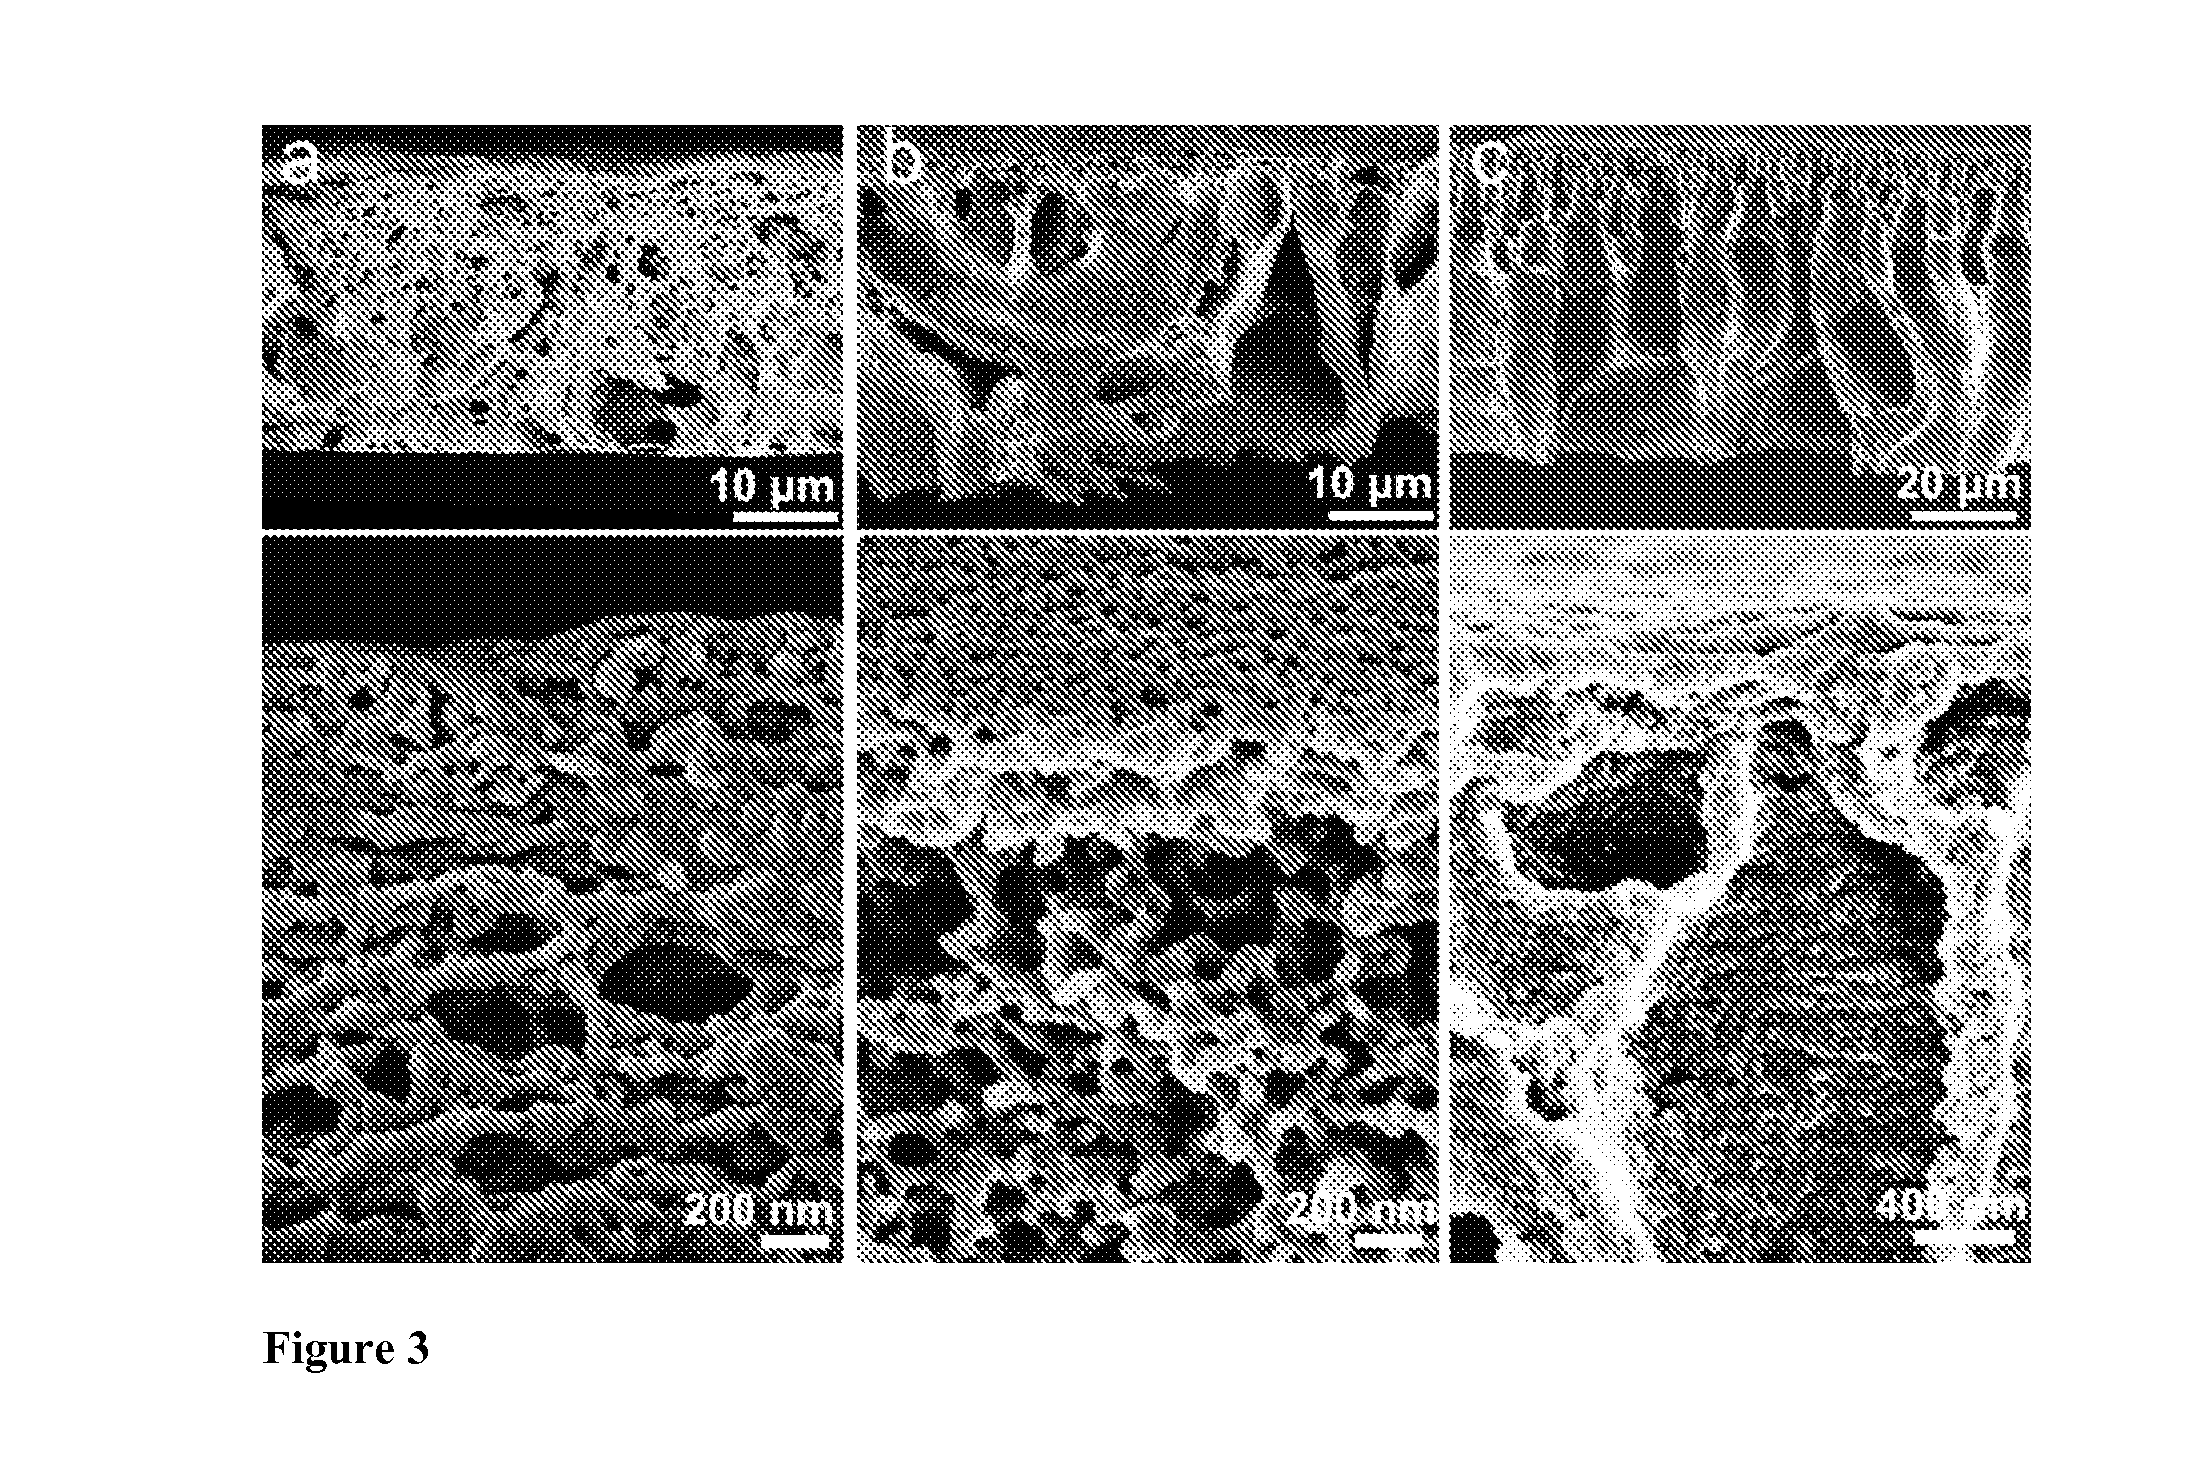 Multiblock copolymer films with inorganic nanoparticles, methods of making same, and uses thereof